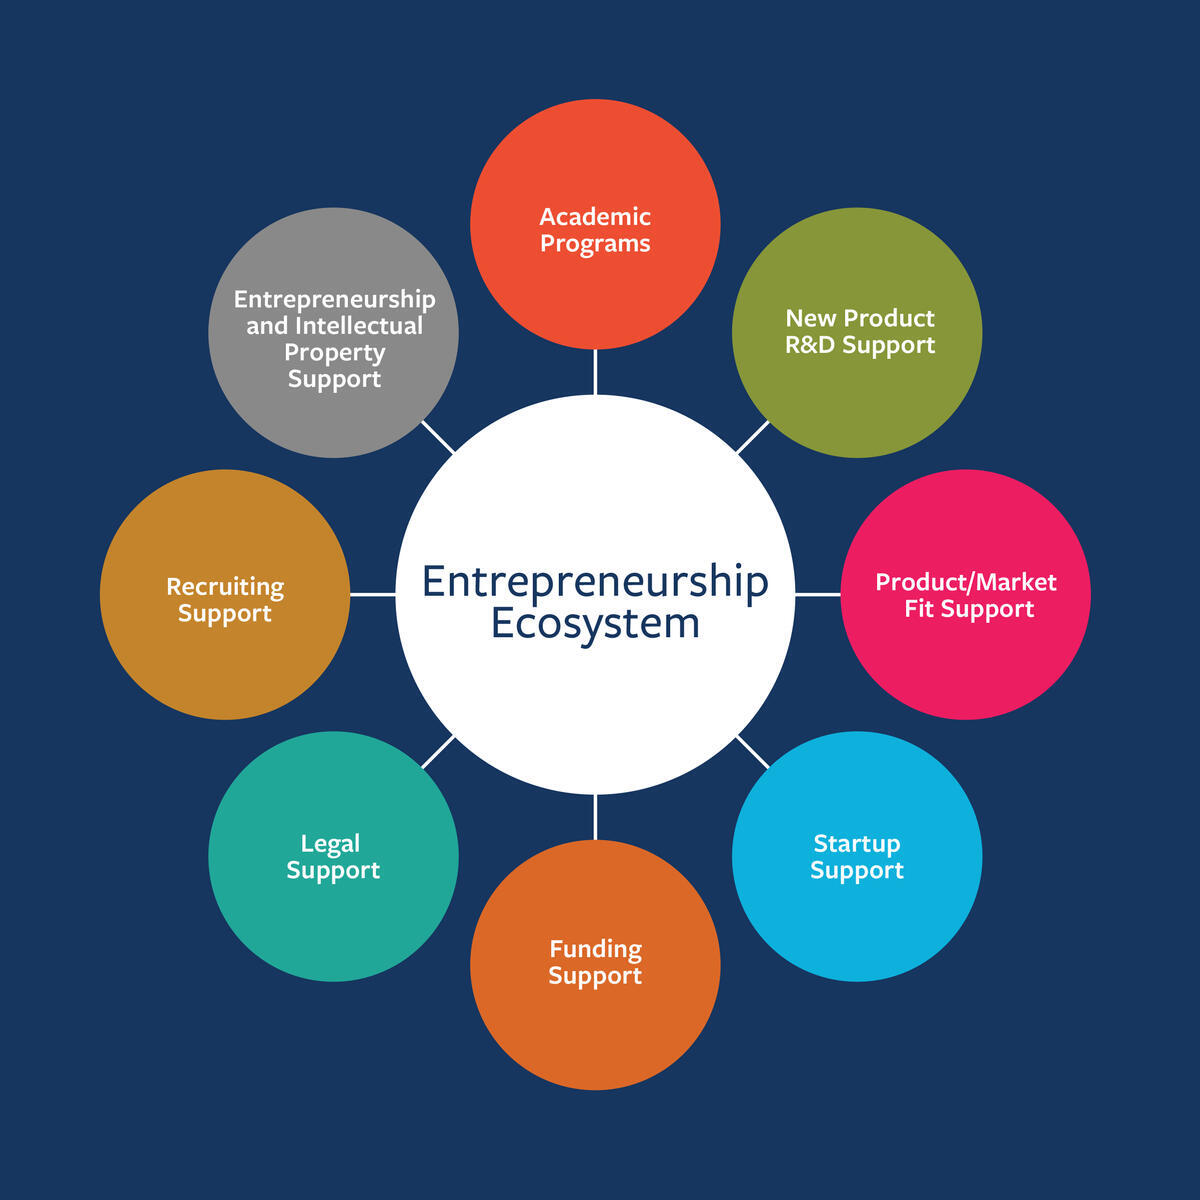 An illustration showing how services across campus intersect to create an Innovation and Entrepreneurship Ecosystem to support entrepreneurs